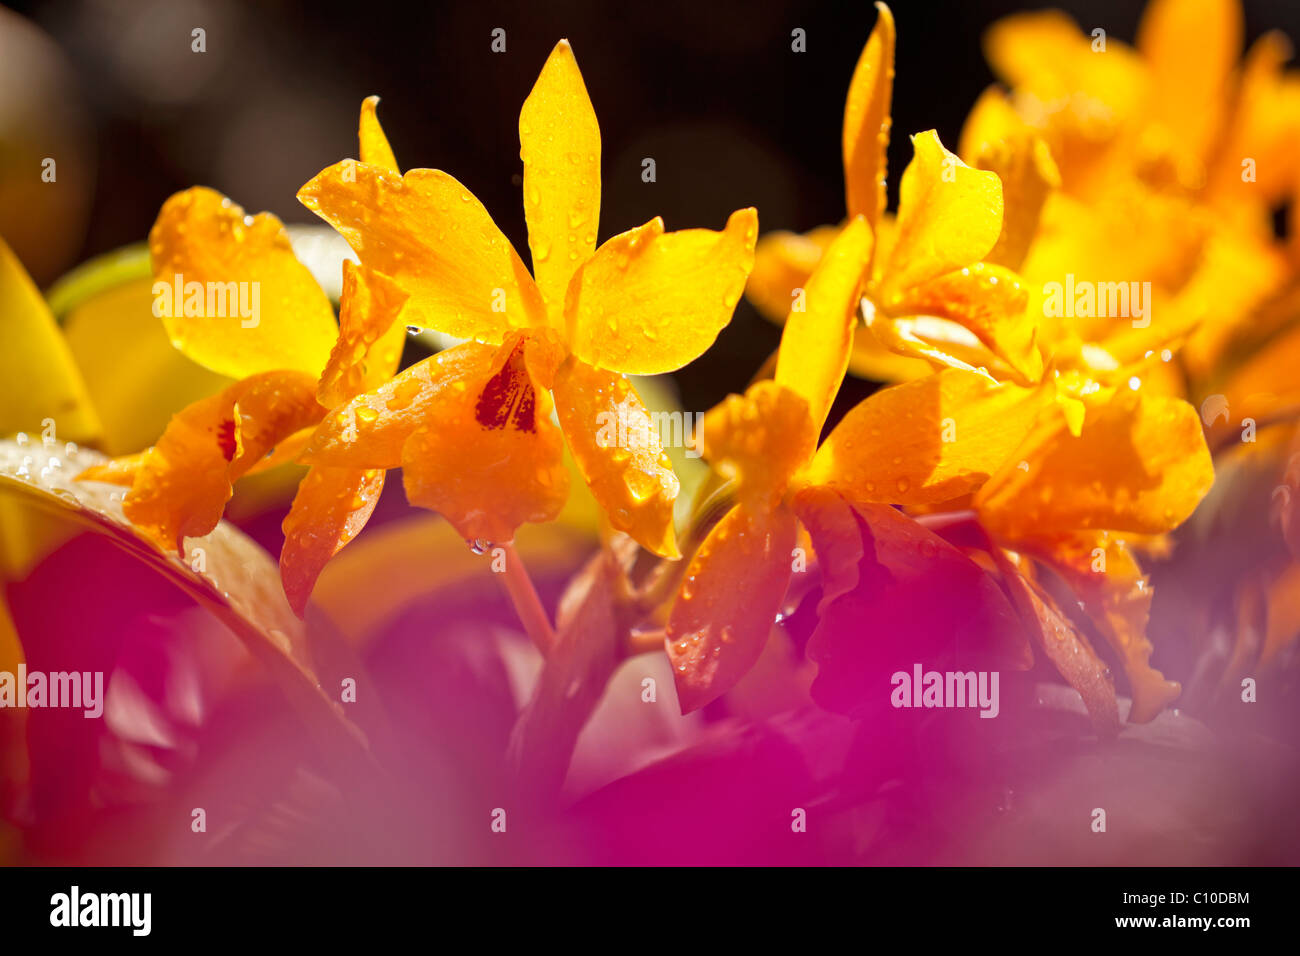 Photo of yellow and maroon Cattleya orchid in Hawaii using selective focus. Stock Photo